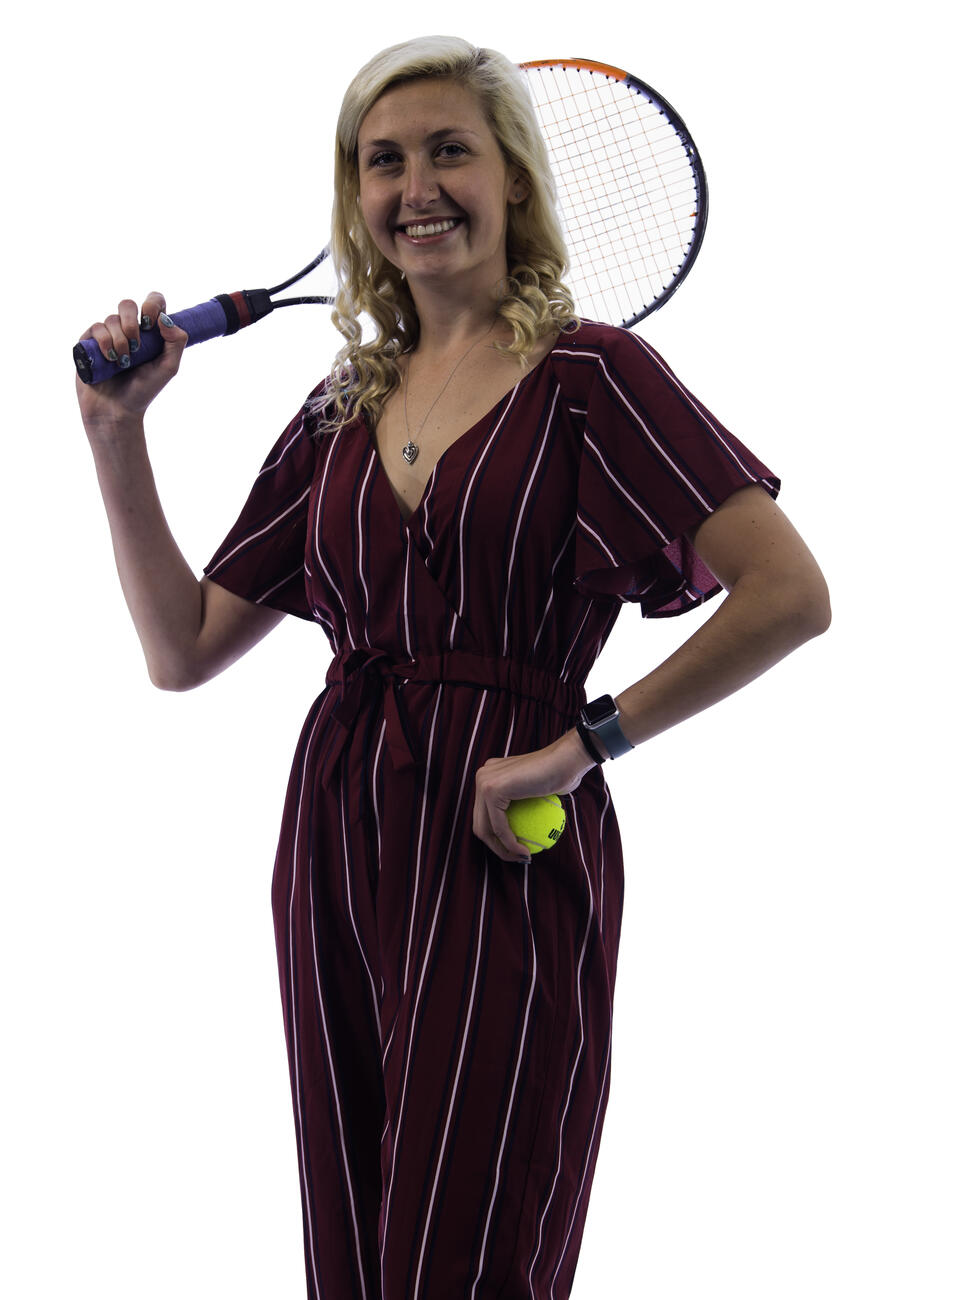 Kassidee Wright poses with a tennis ball in one hand and her tennis racket on her shoulder.